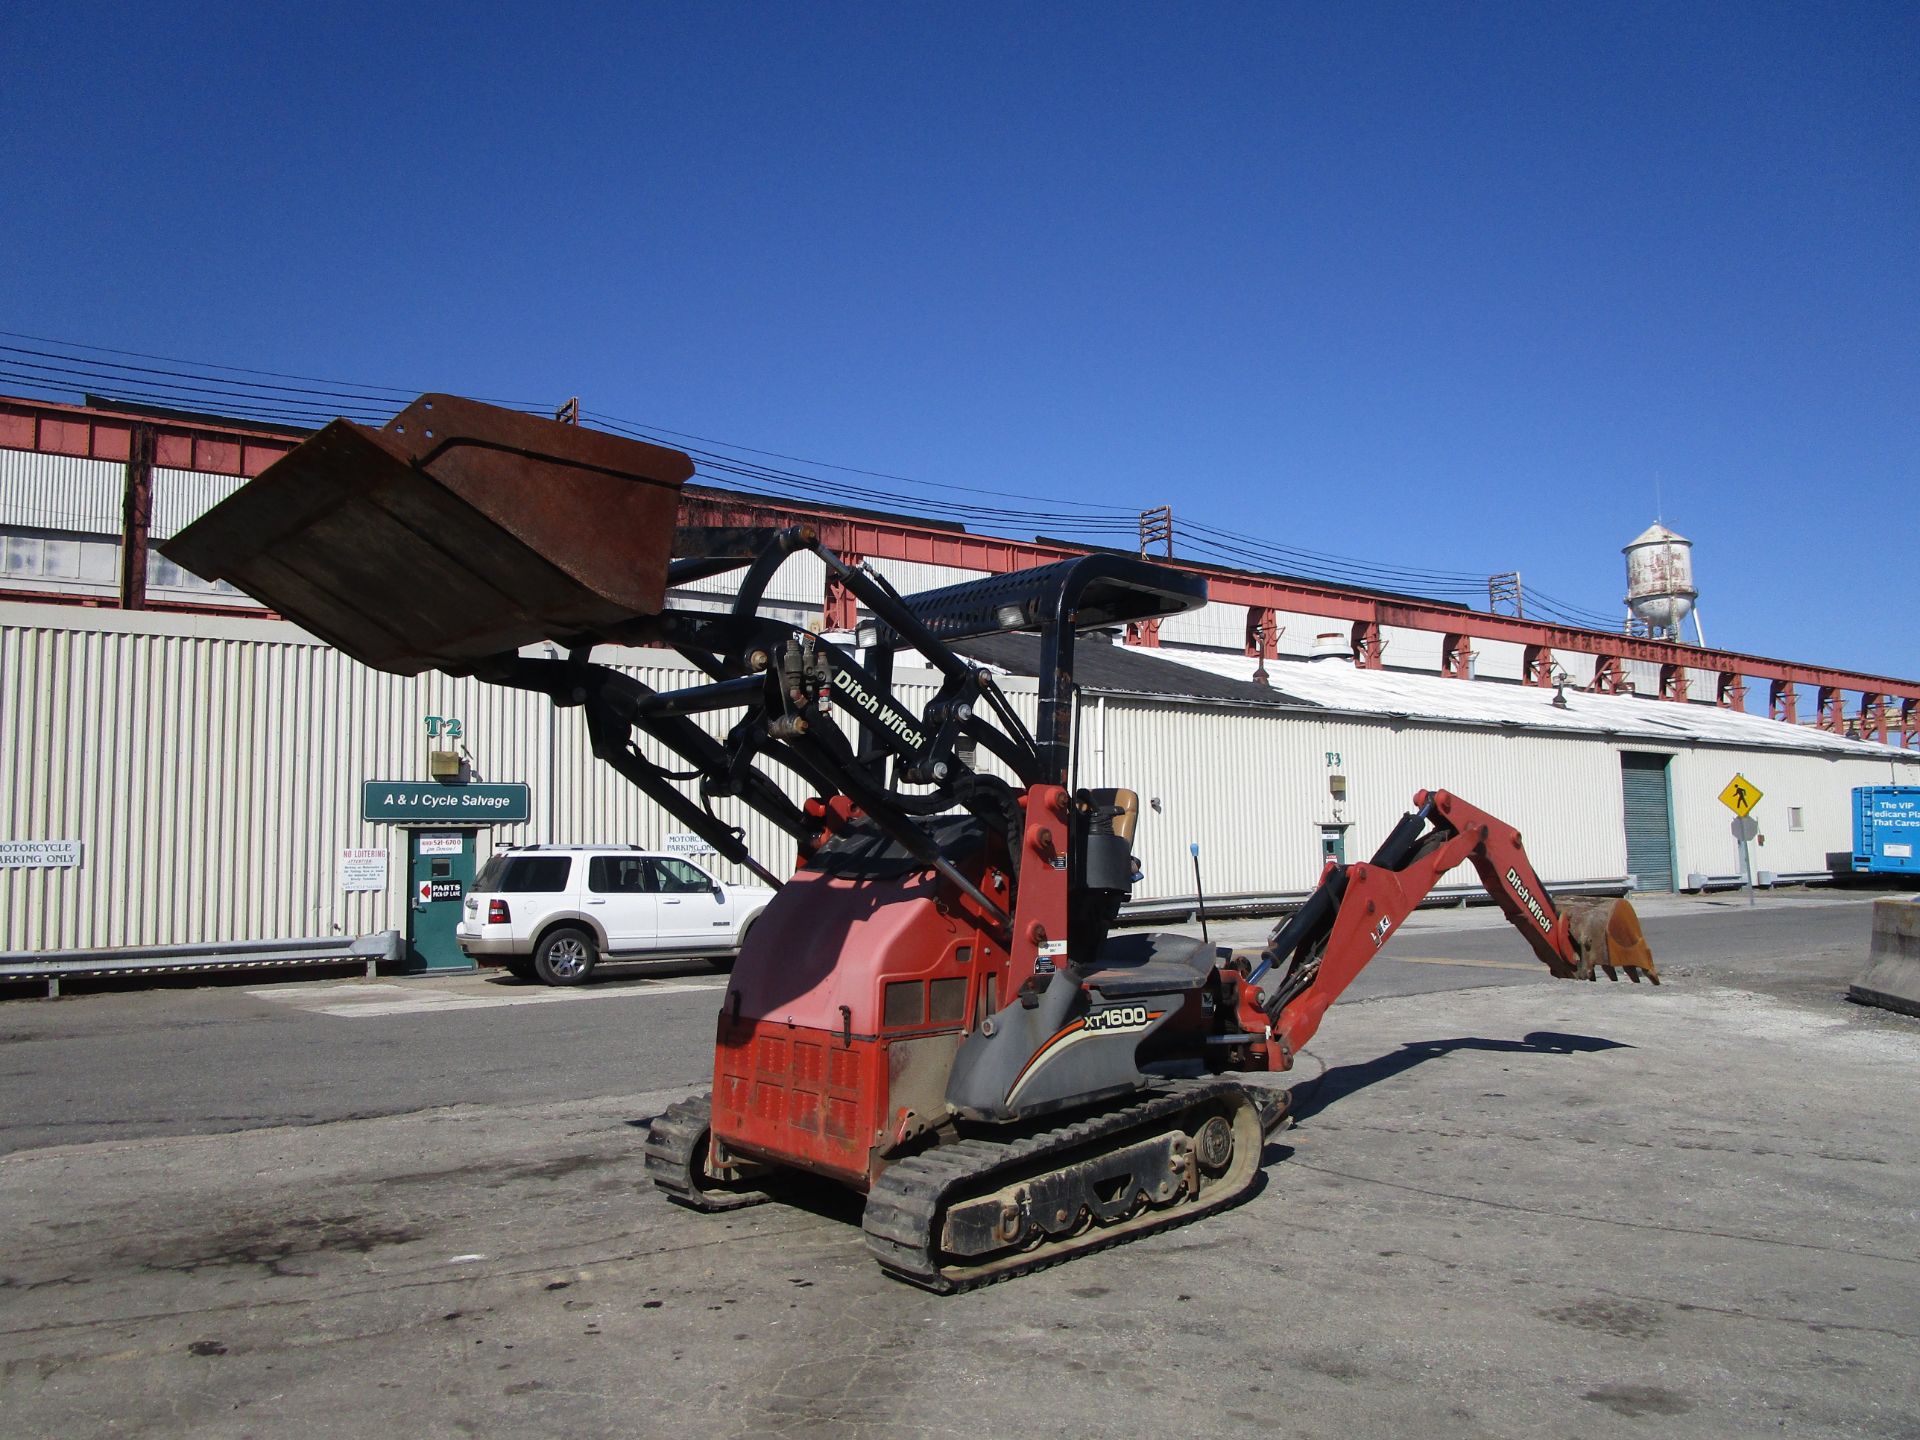 2011 Ditch Witch XT1600 Backhoe - Image 30 of 38